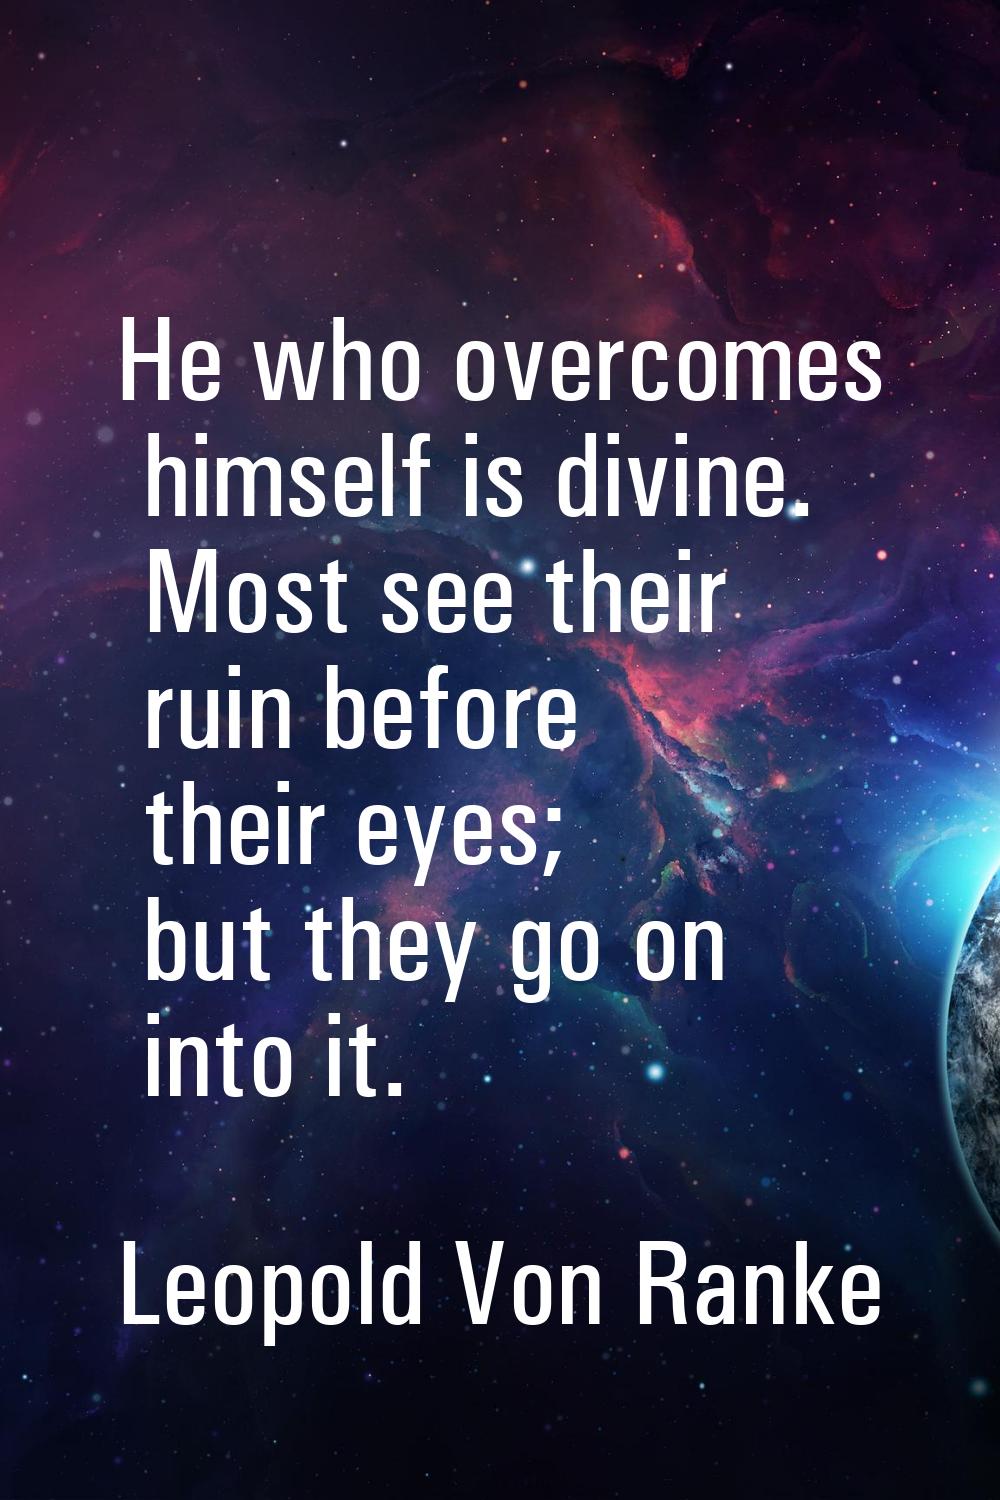 He who overcomes himself is divine. Most see their ruin before their eyes; but they go on into it.